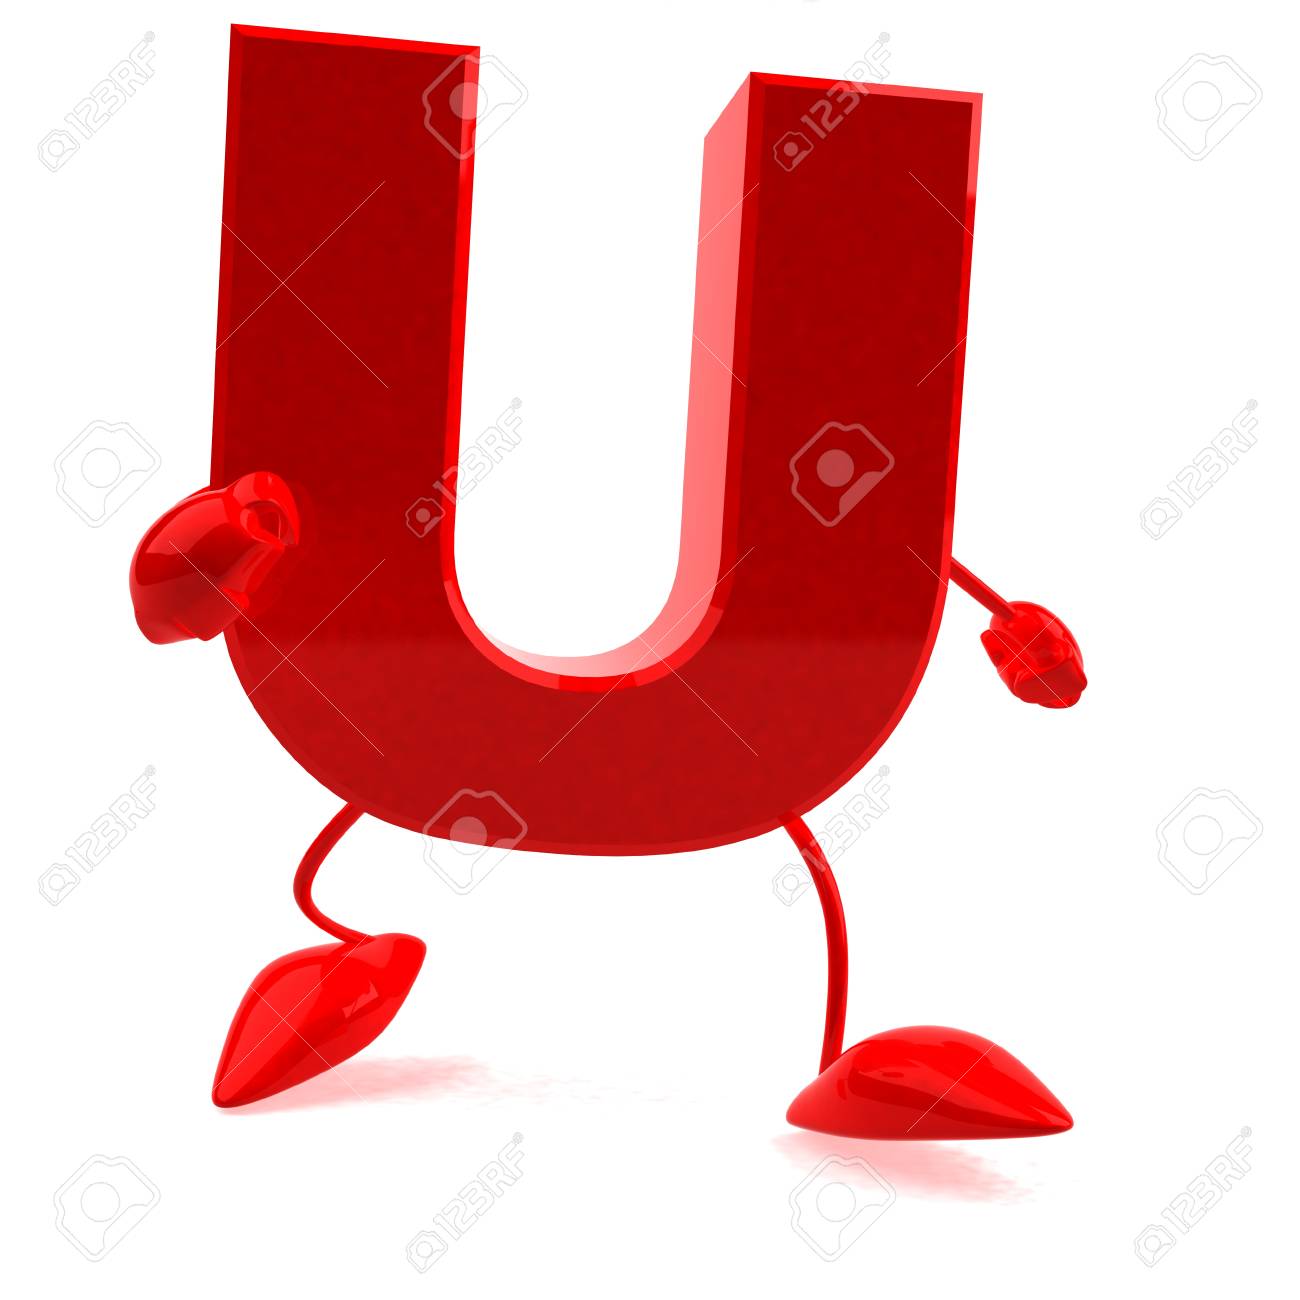 Cartoon Character Of Letter U Stock Photo, Picture And Royalty - The Letter  U Photo (44600212) - Fanpop